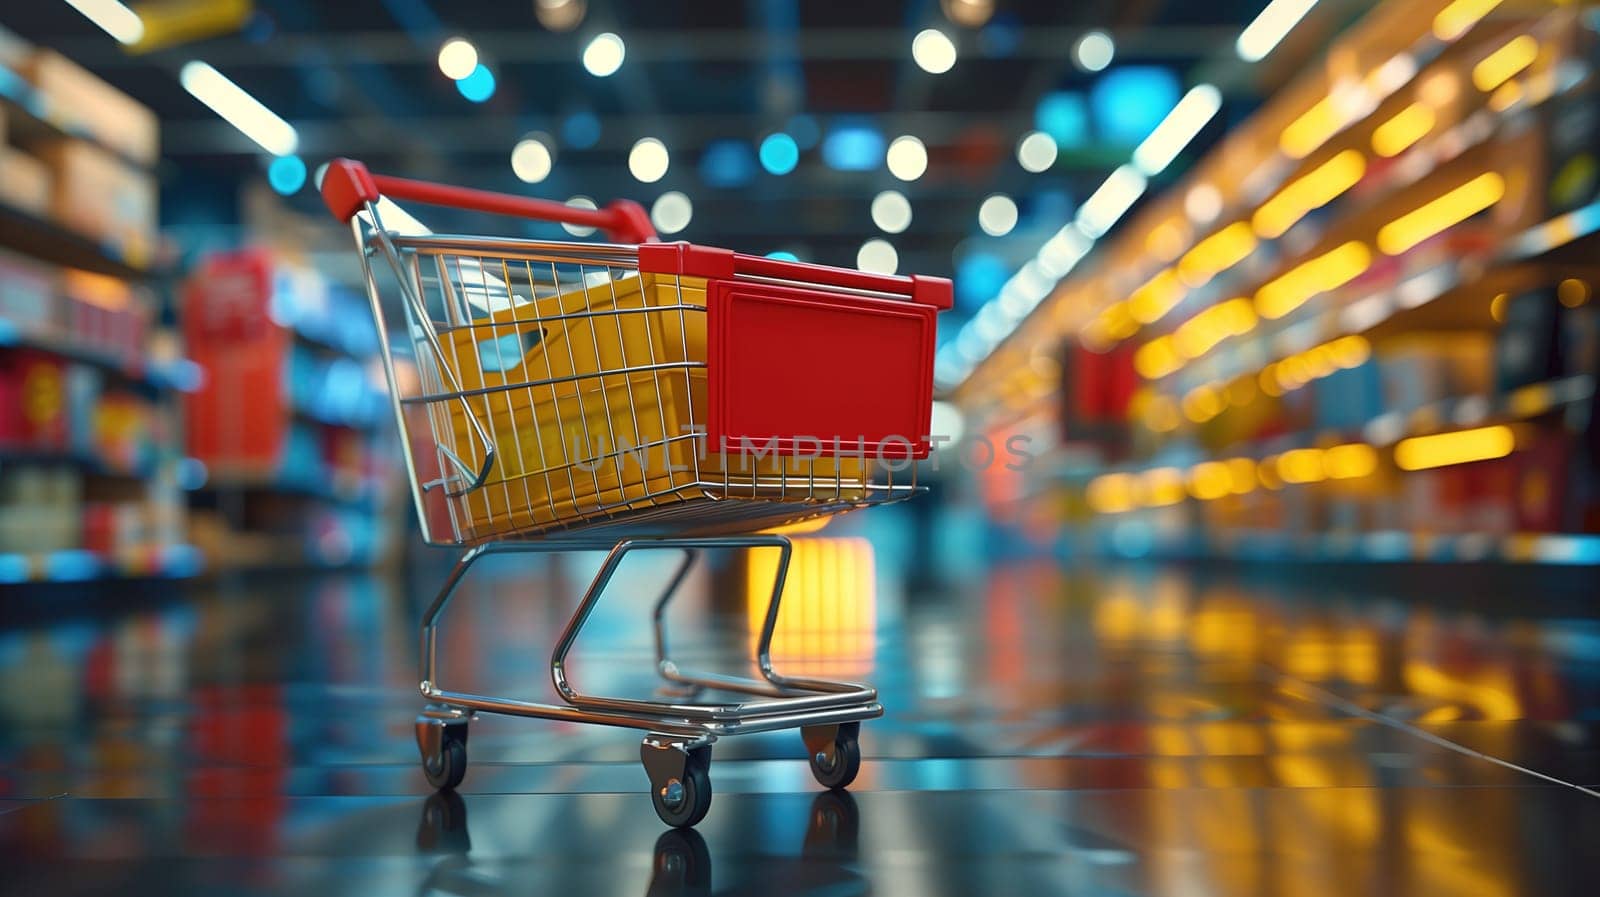 Shopping Cart With Red Basket by TRMK